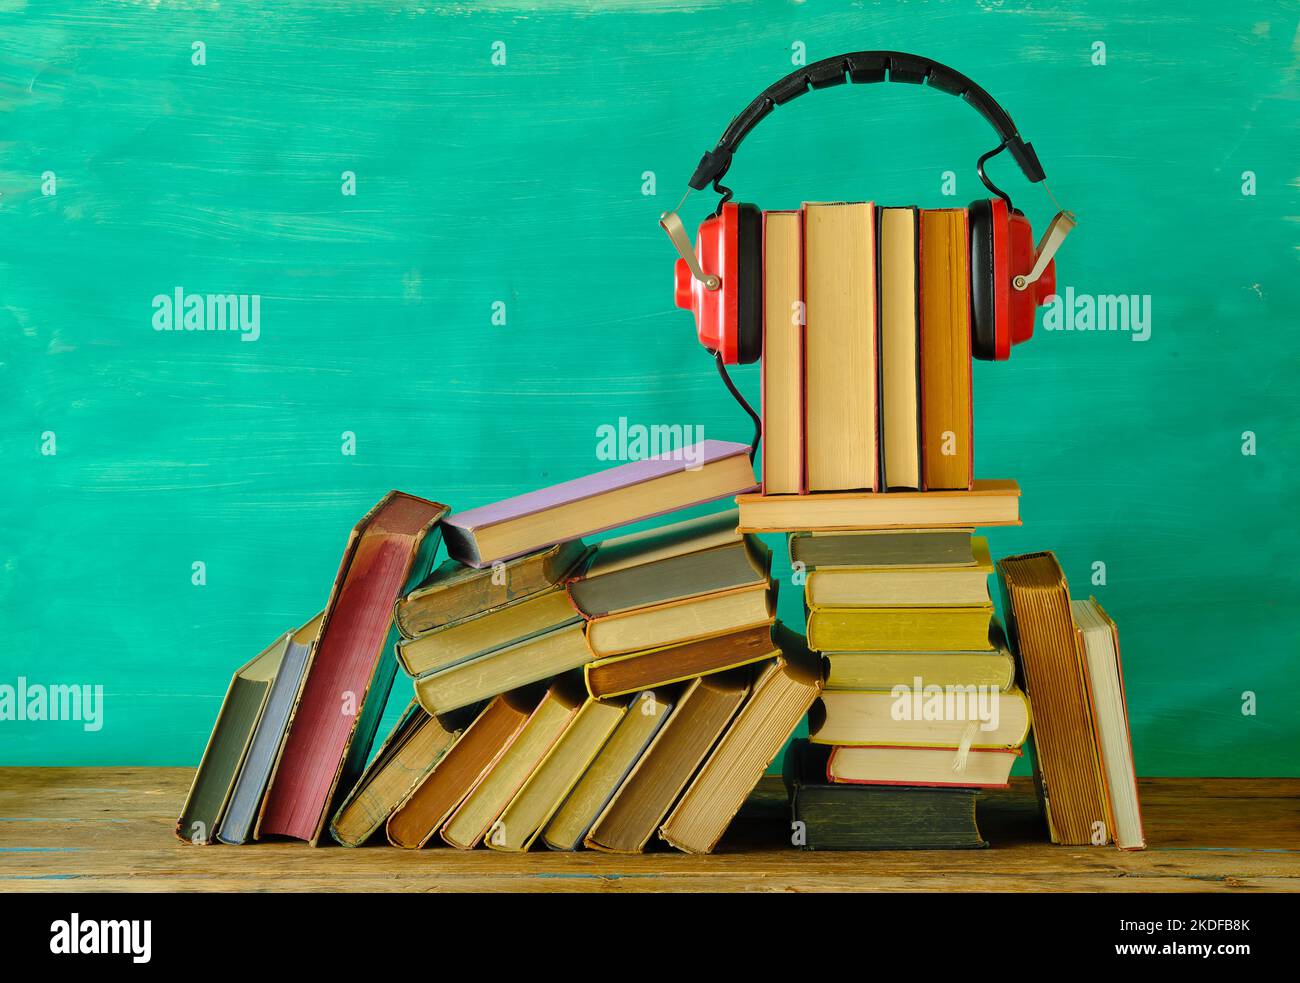 audio book concept with stack of books and vintage red headphone on teal background,good copy space. Stock Photo